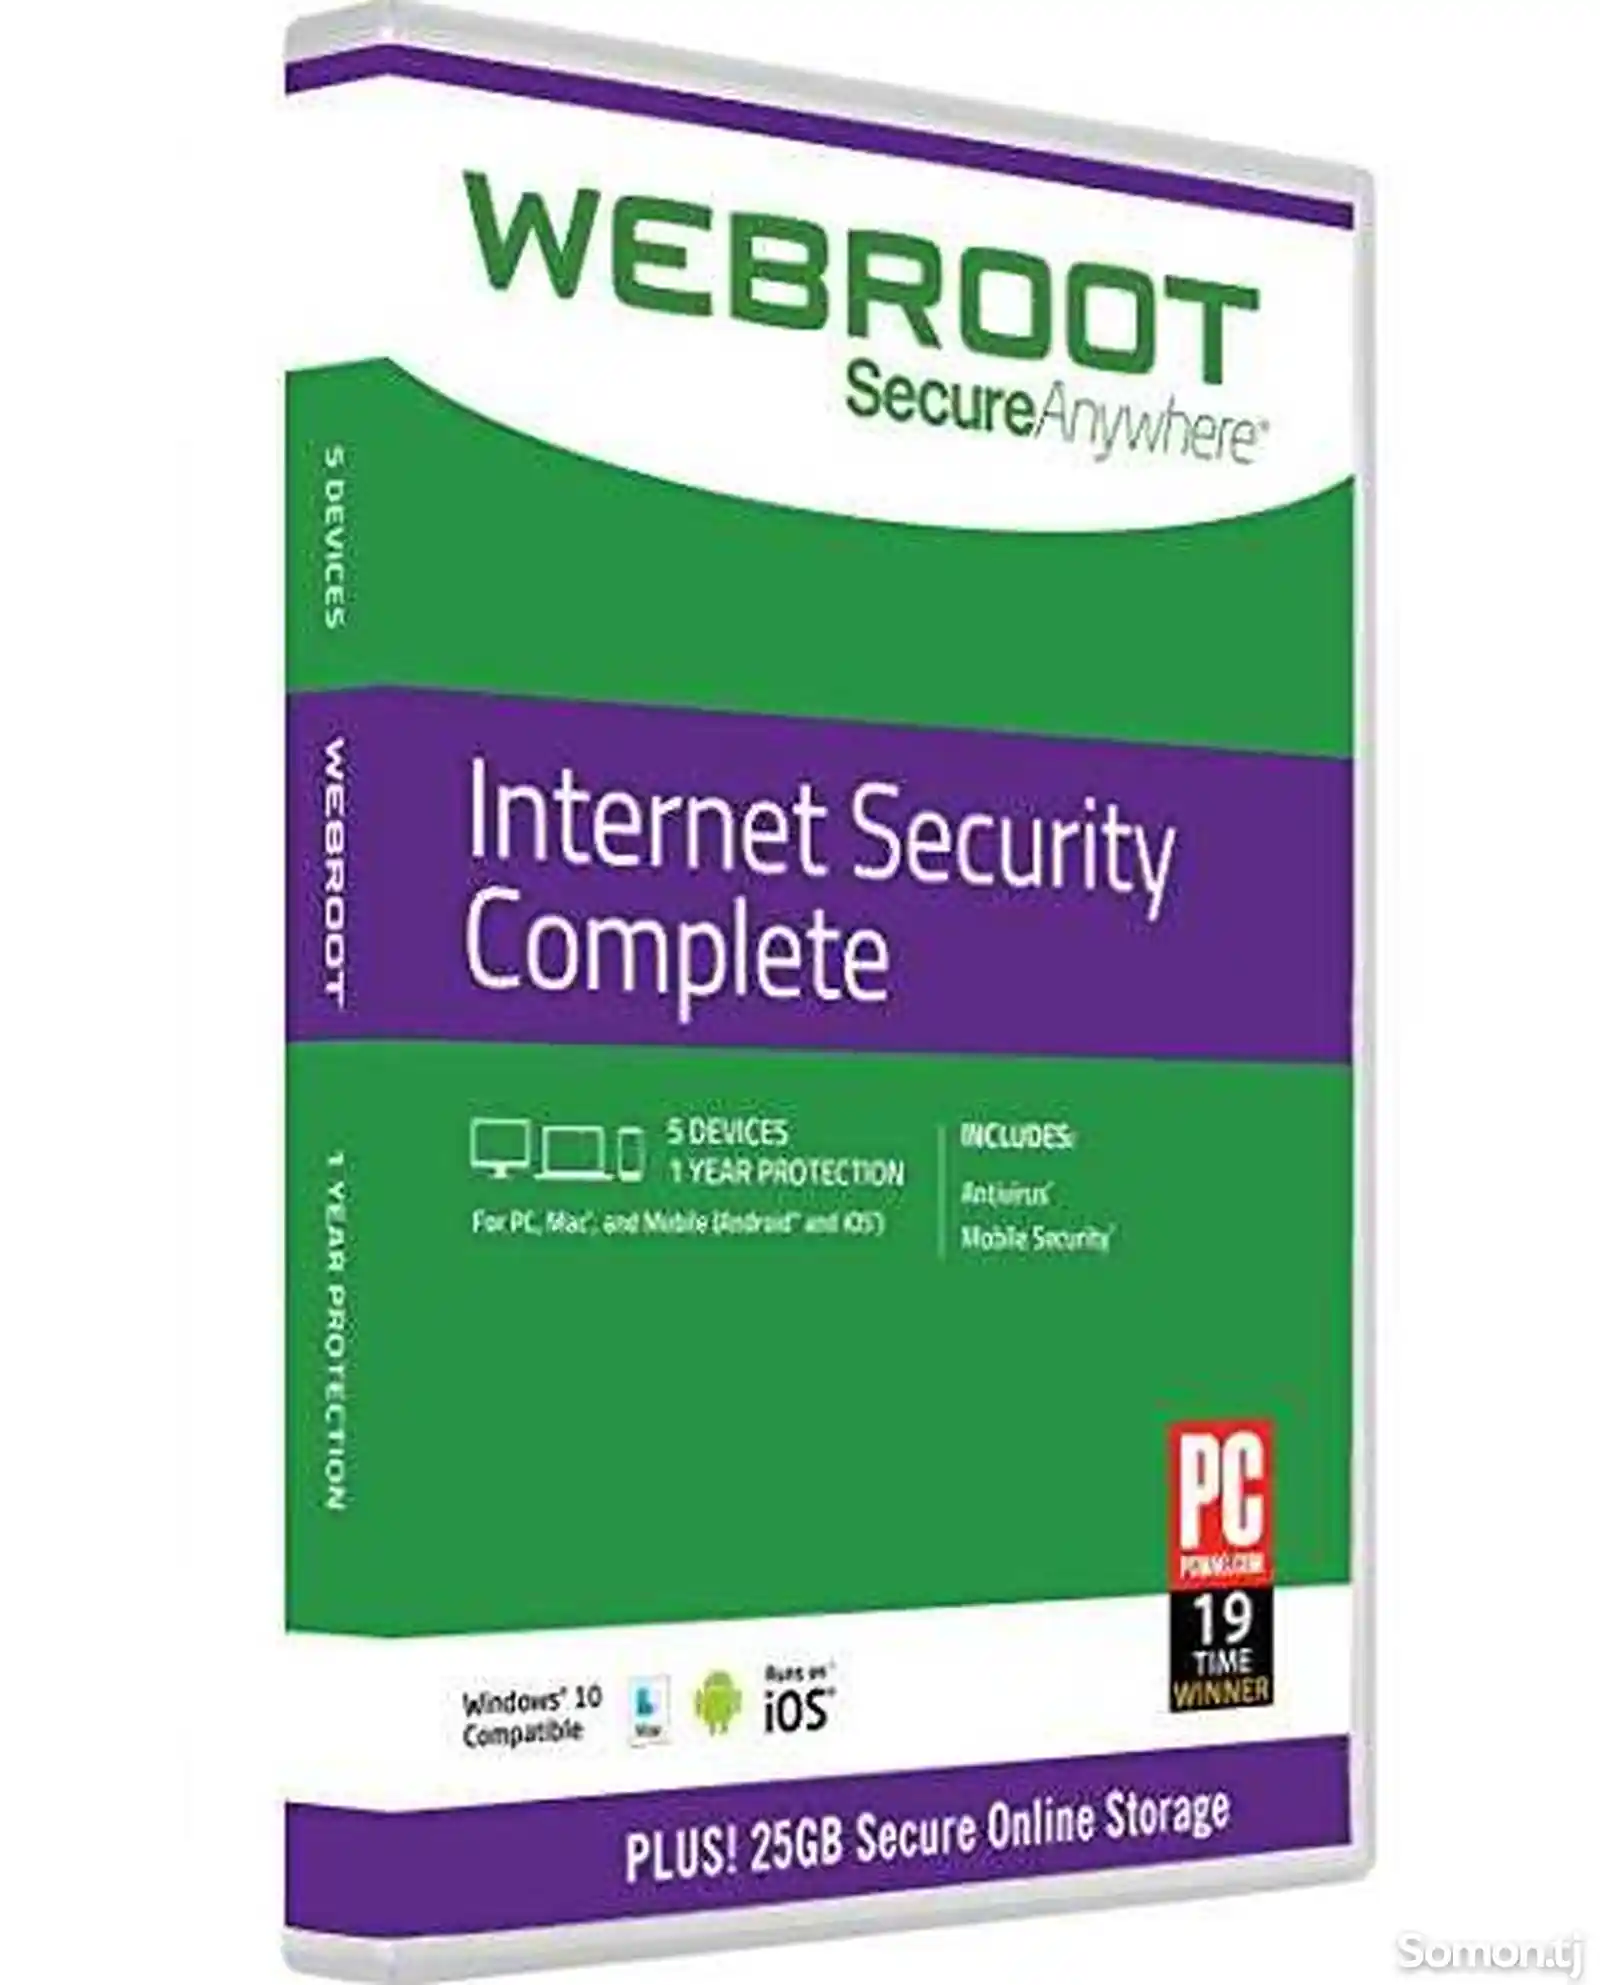 Webroot SecureAnywhere Complete - иҷозатнома барои 1 роёна, 1 сол-1